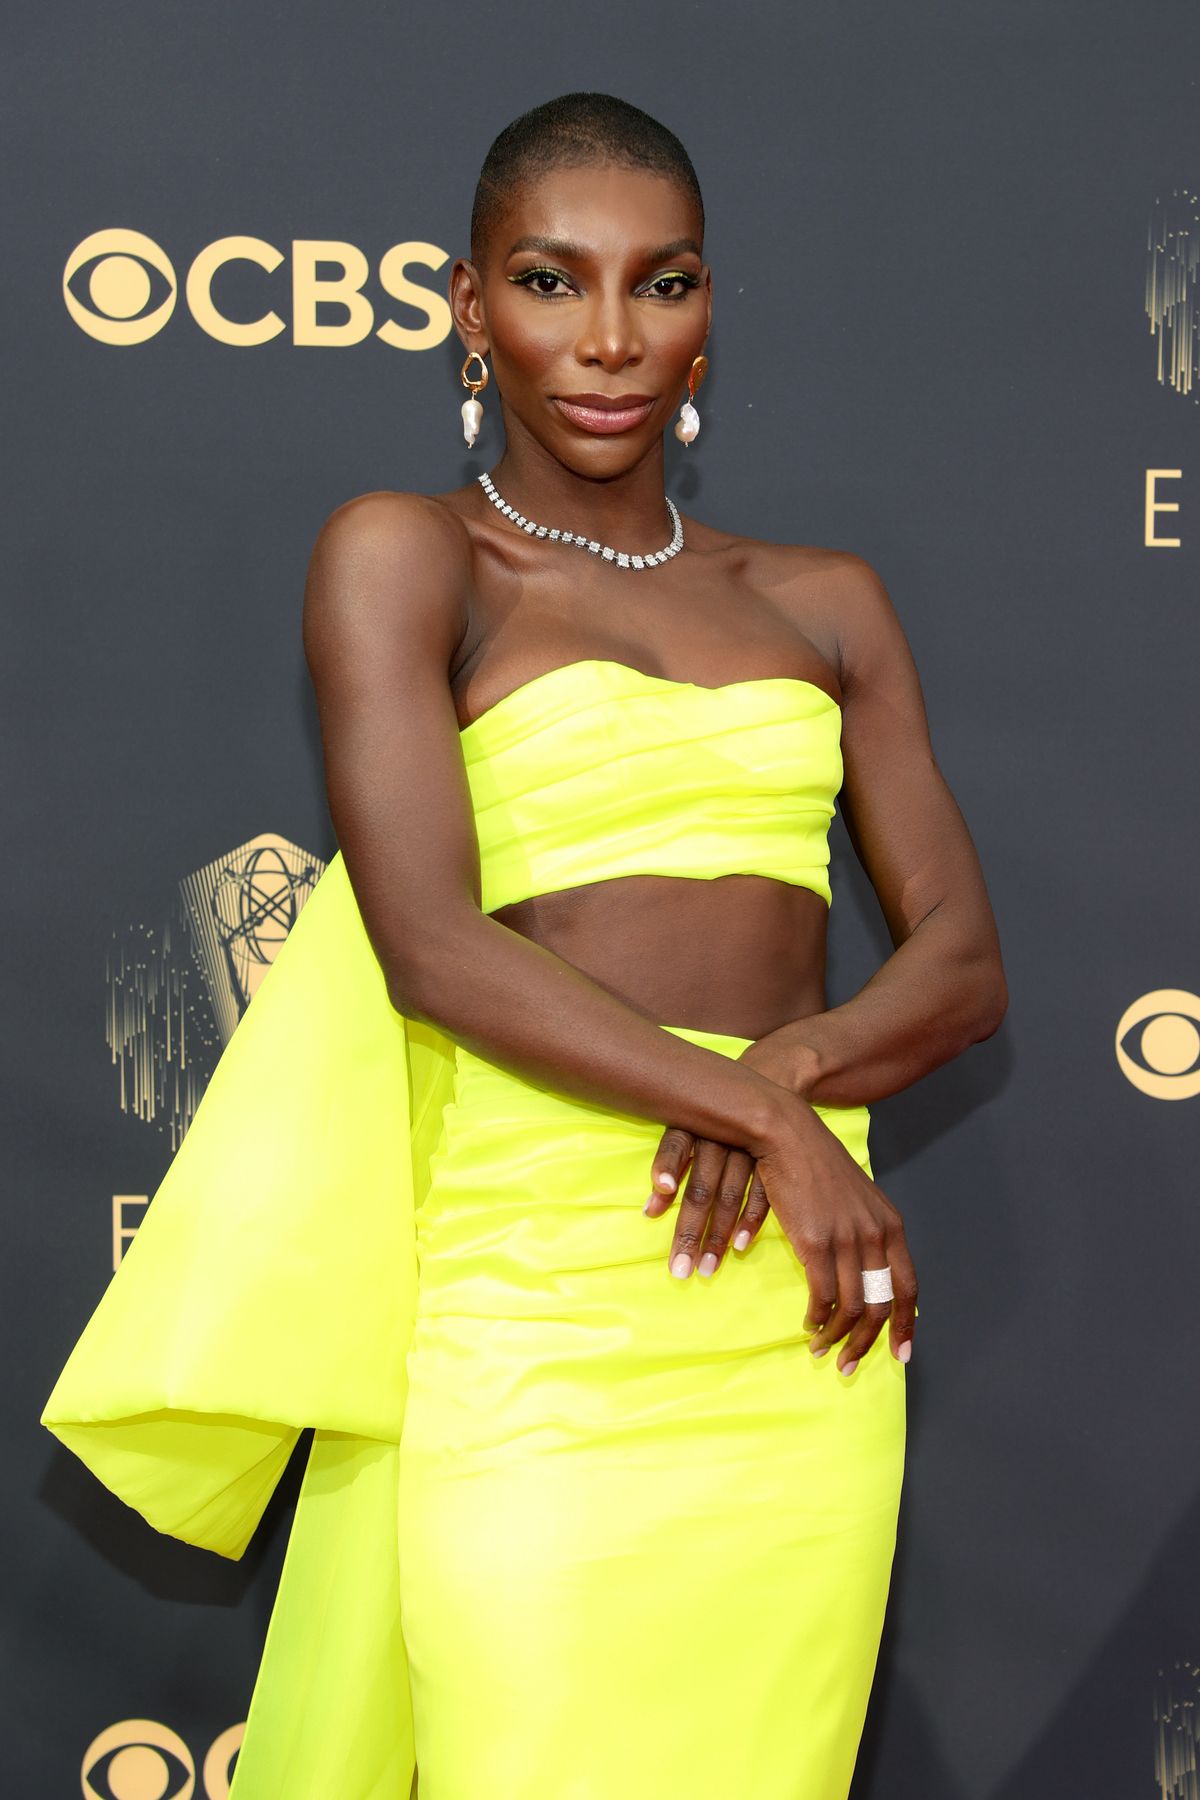 los angeles, california   september 19 michaela coel attends the 73rd primetime emmy awards at la live on september 19, 2021 in los angeles, california photo by rich furygetty images